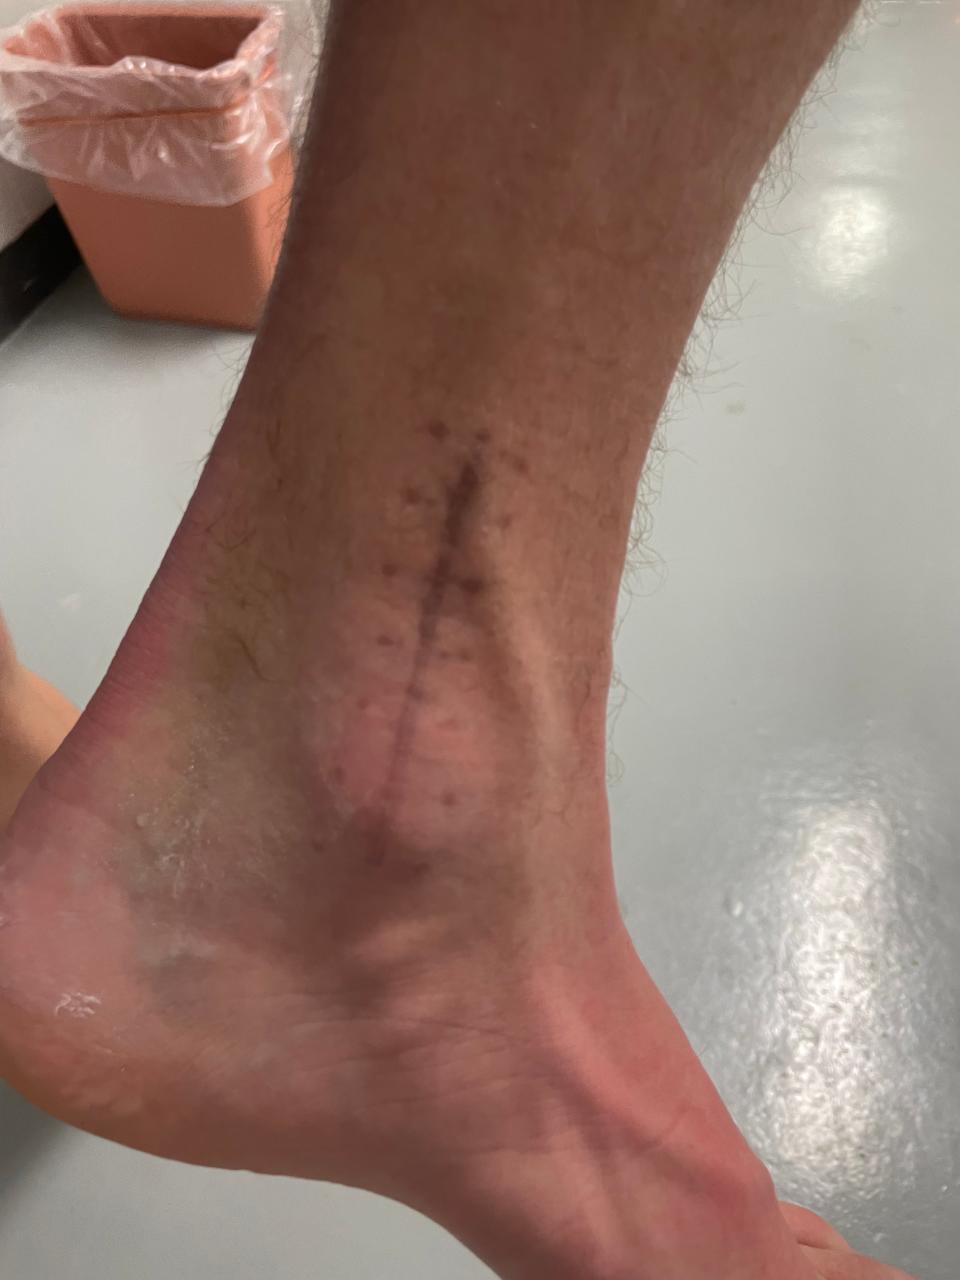 The scar on West Central forward Wilson Droge's foot following surgery to repair a broken ankle during the Trojans' football season. Photo taken Jan. 22, 2022.